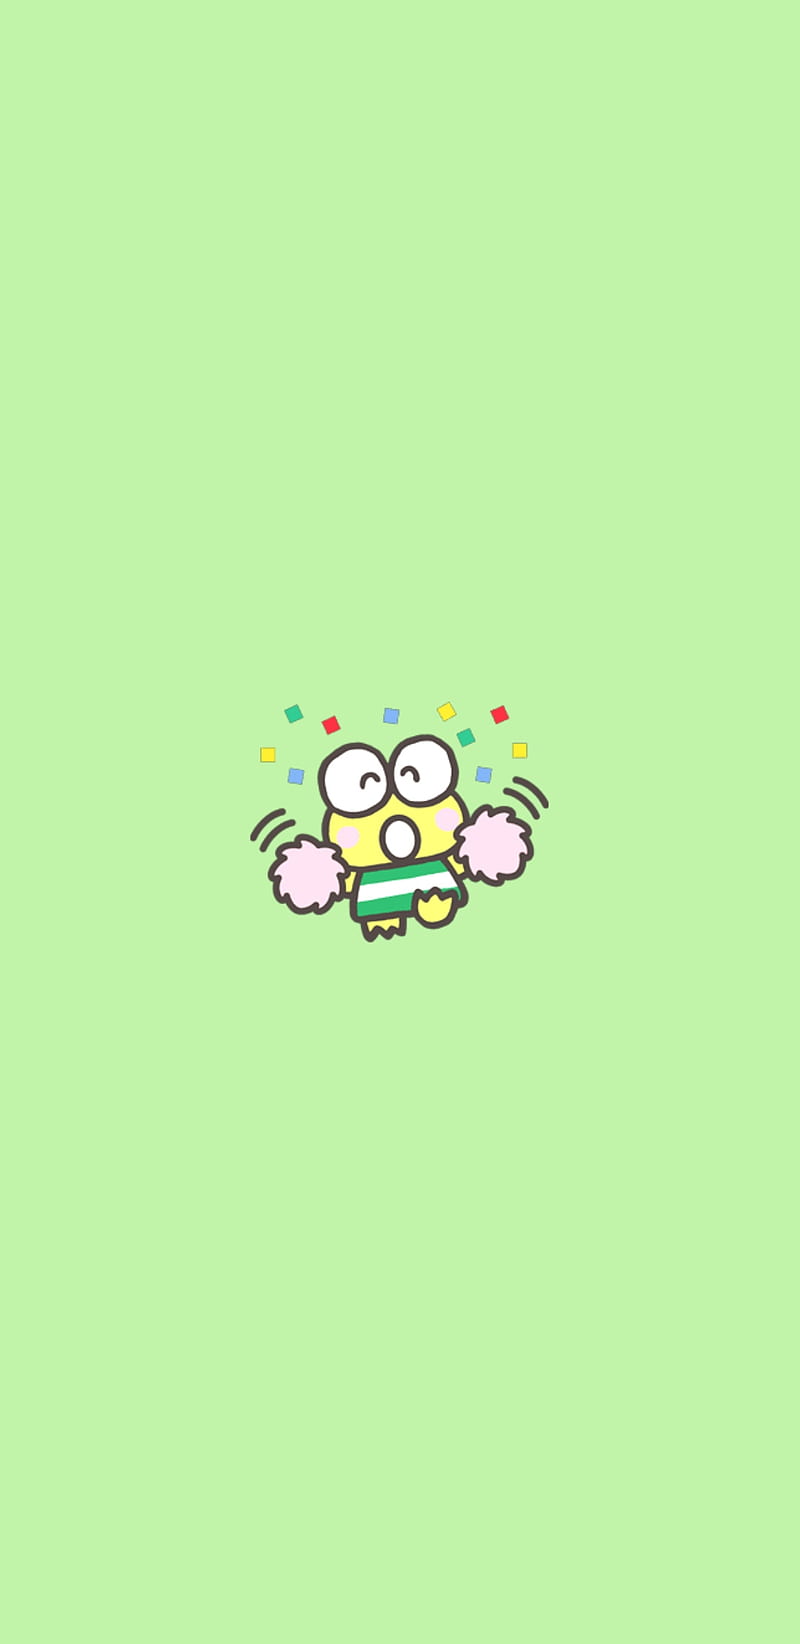 IPhone wallpaper of a cute green frog with a striped shirt and pink cheeks - Green, Keroppi